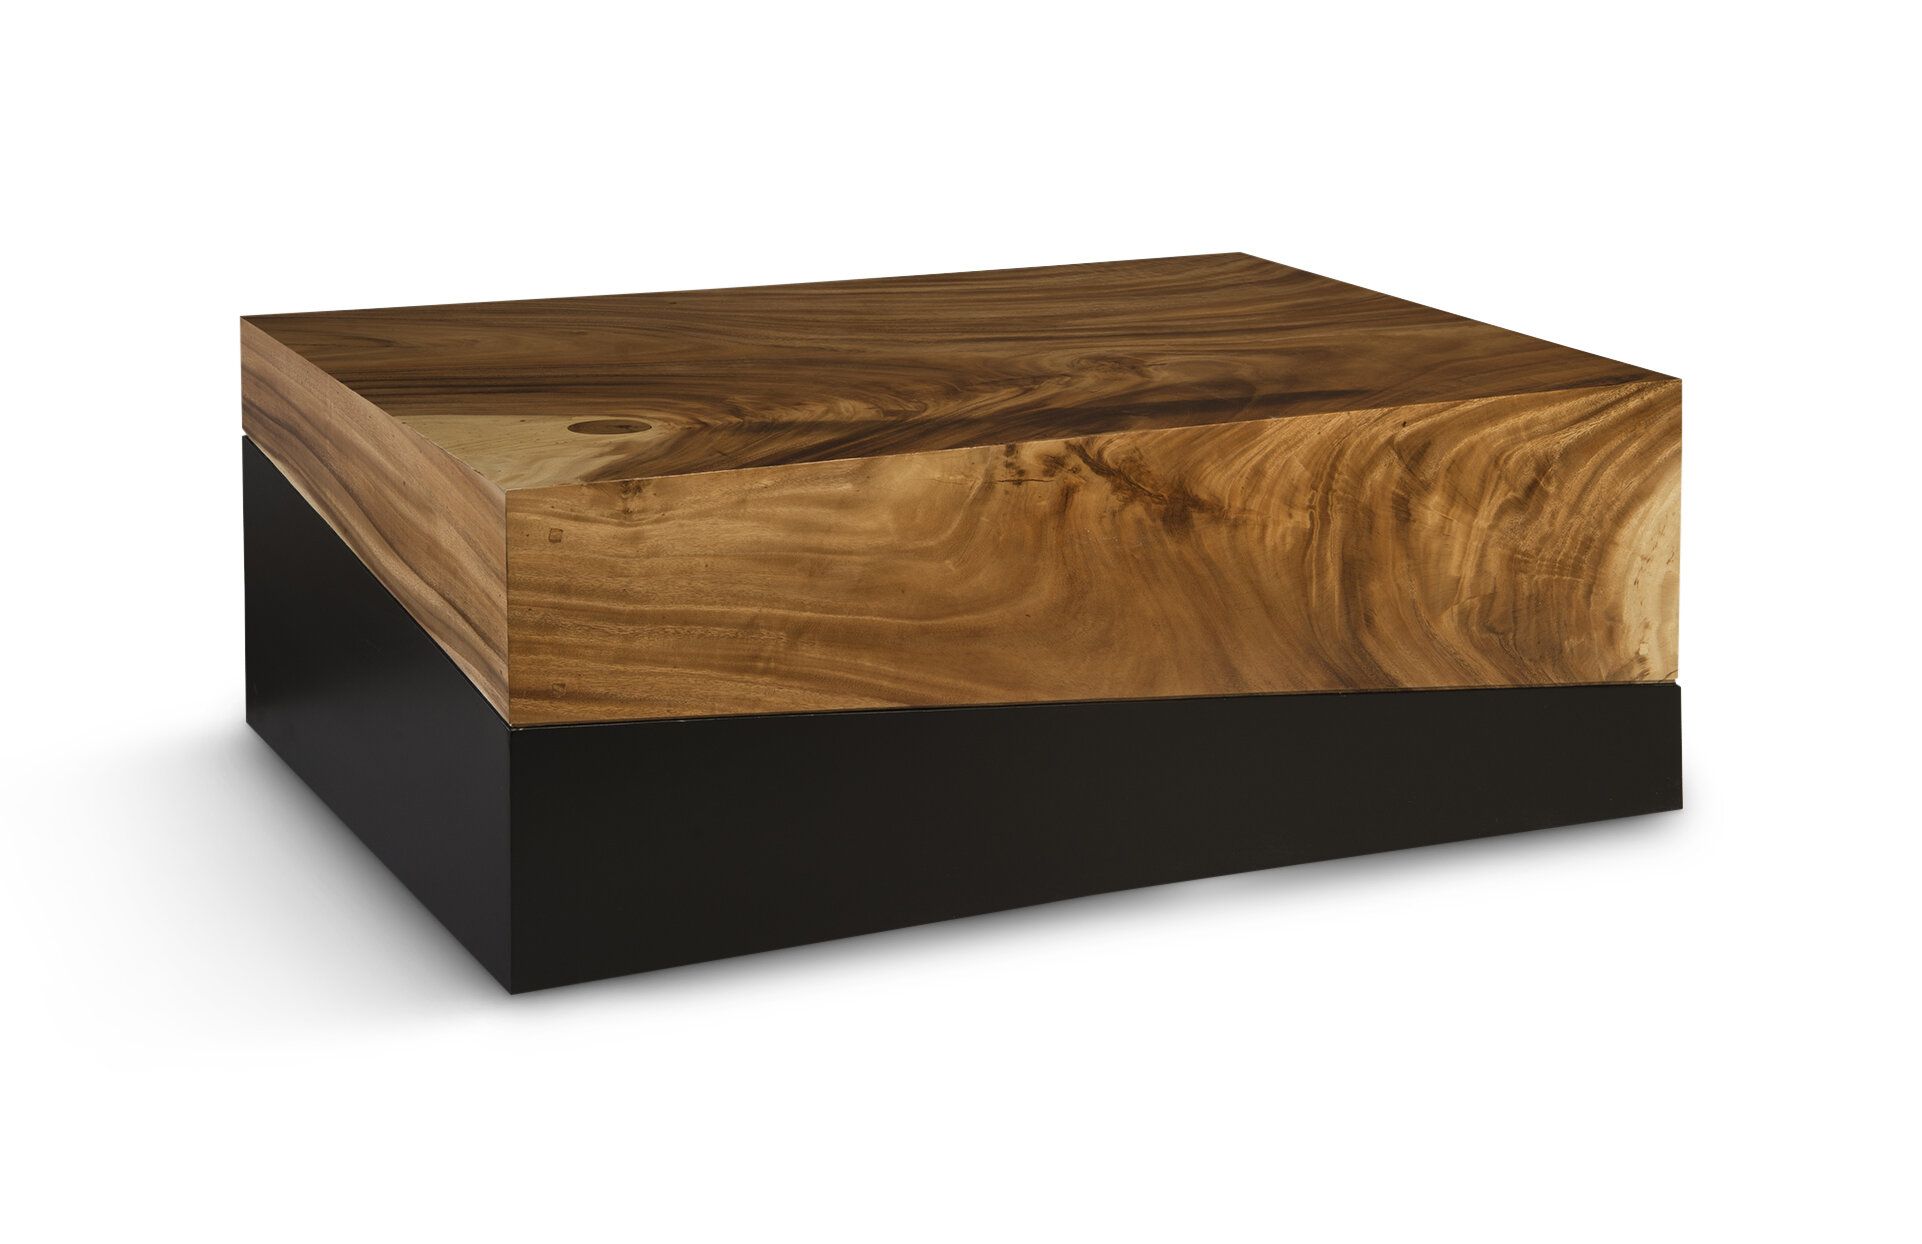 Phillips Collection Geometry Block Coffee Table | Wayfair Throughout Geometric Block Solid Coffee Tables (View 5 of 15)